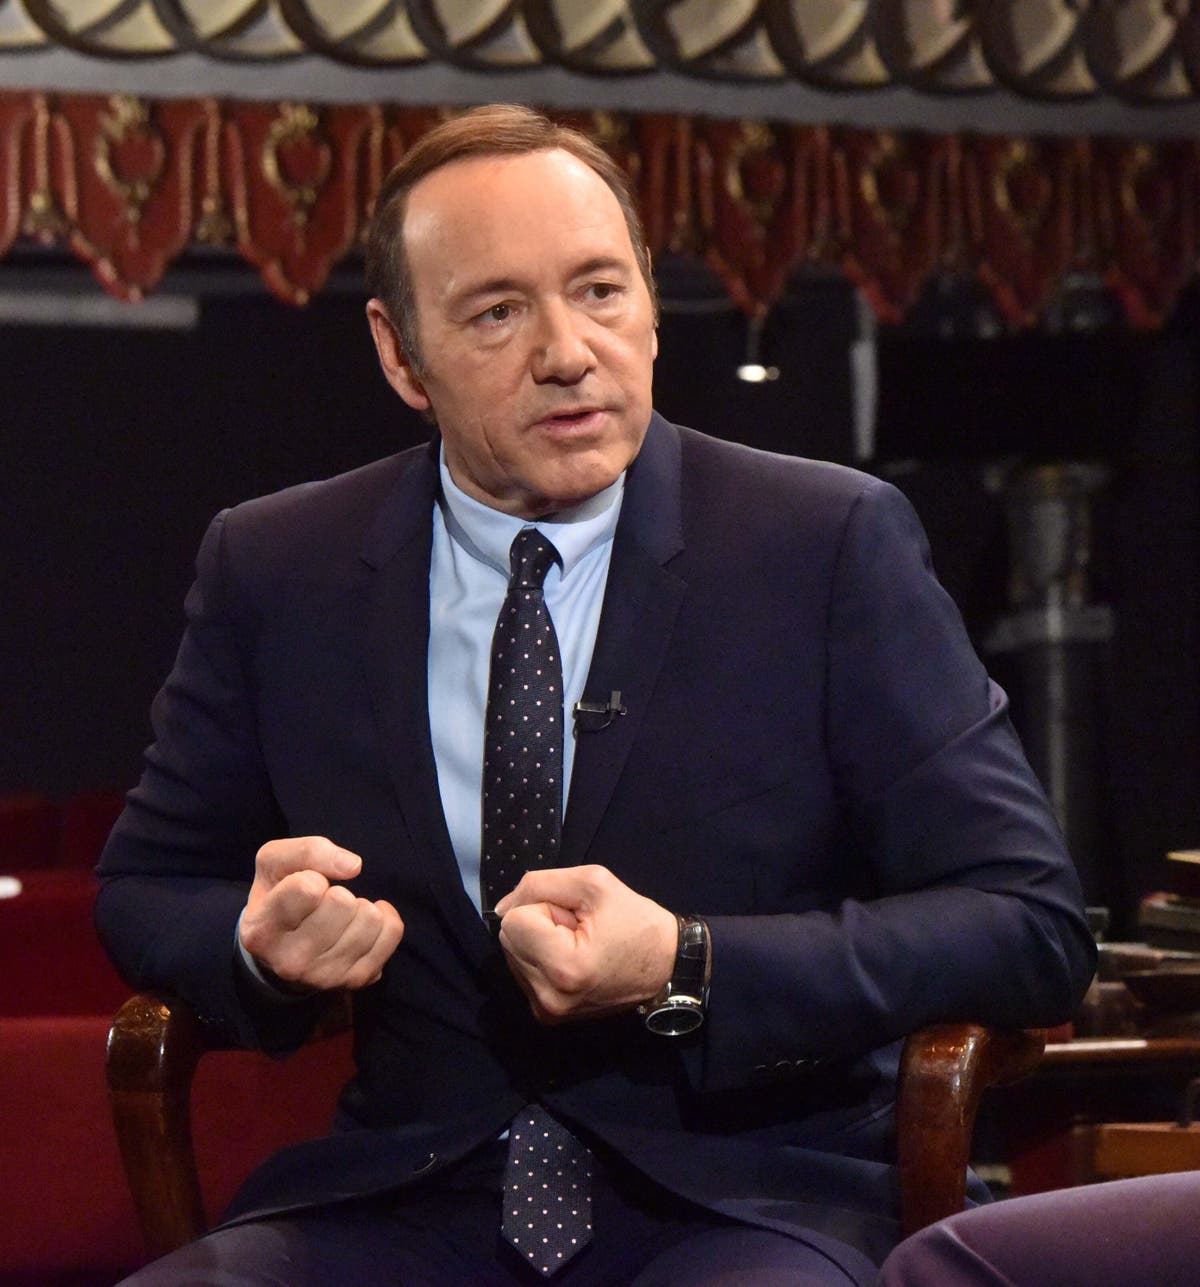 Kevin Spacey due in UK court charged with sexually assaulting men